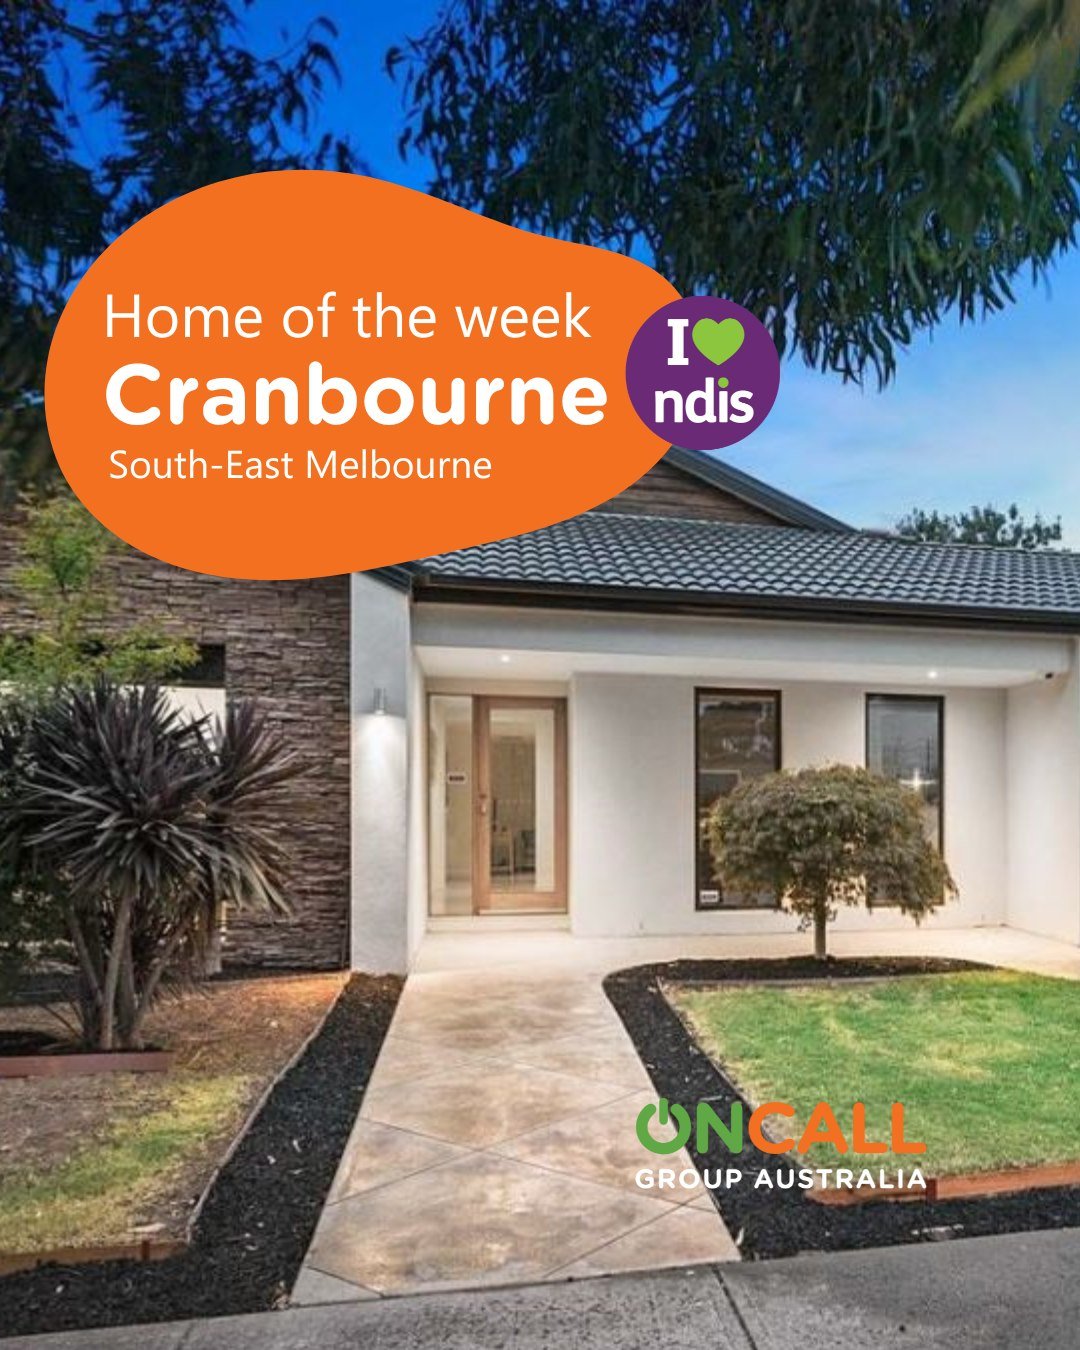 𝗣𝗲𝗮𝗰𝗲 𝗼𝗳 𝗠𝗶𝗻𝗱 𝗦𝘁𝗮𝗿𝘁𝘀 𝗔𝘁 𝗛𝗼𝗺𝗲

Seeking a cosy home in Cranbourne? We've got 2 bedrooms available in a stylish, non-SDA house!

Enjoy spacious rooms and plenty of communal areas: 3 living rooms, a large backyard, and an amazing u